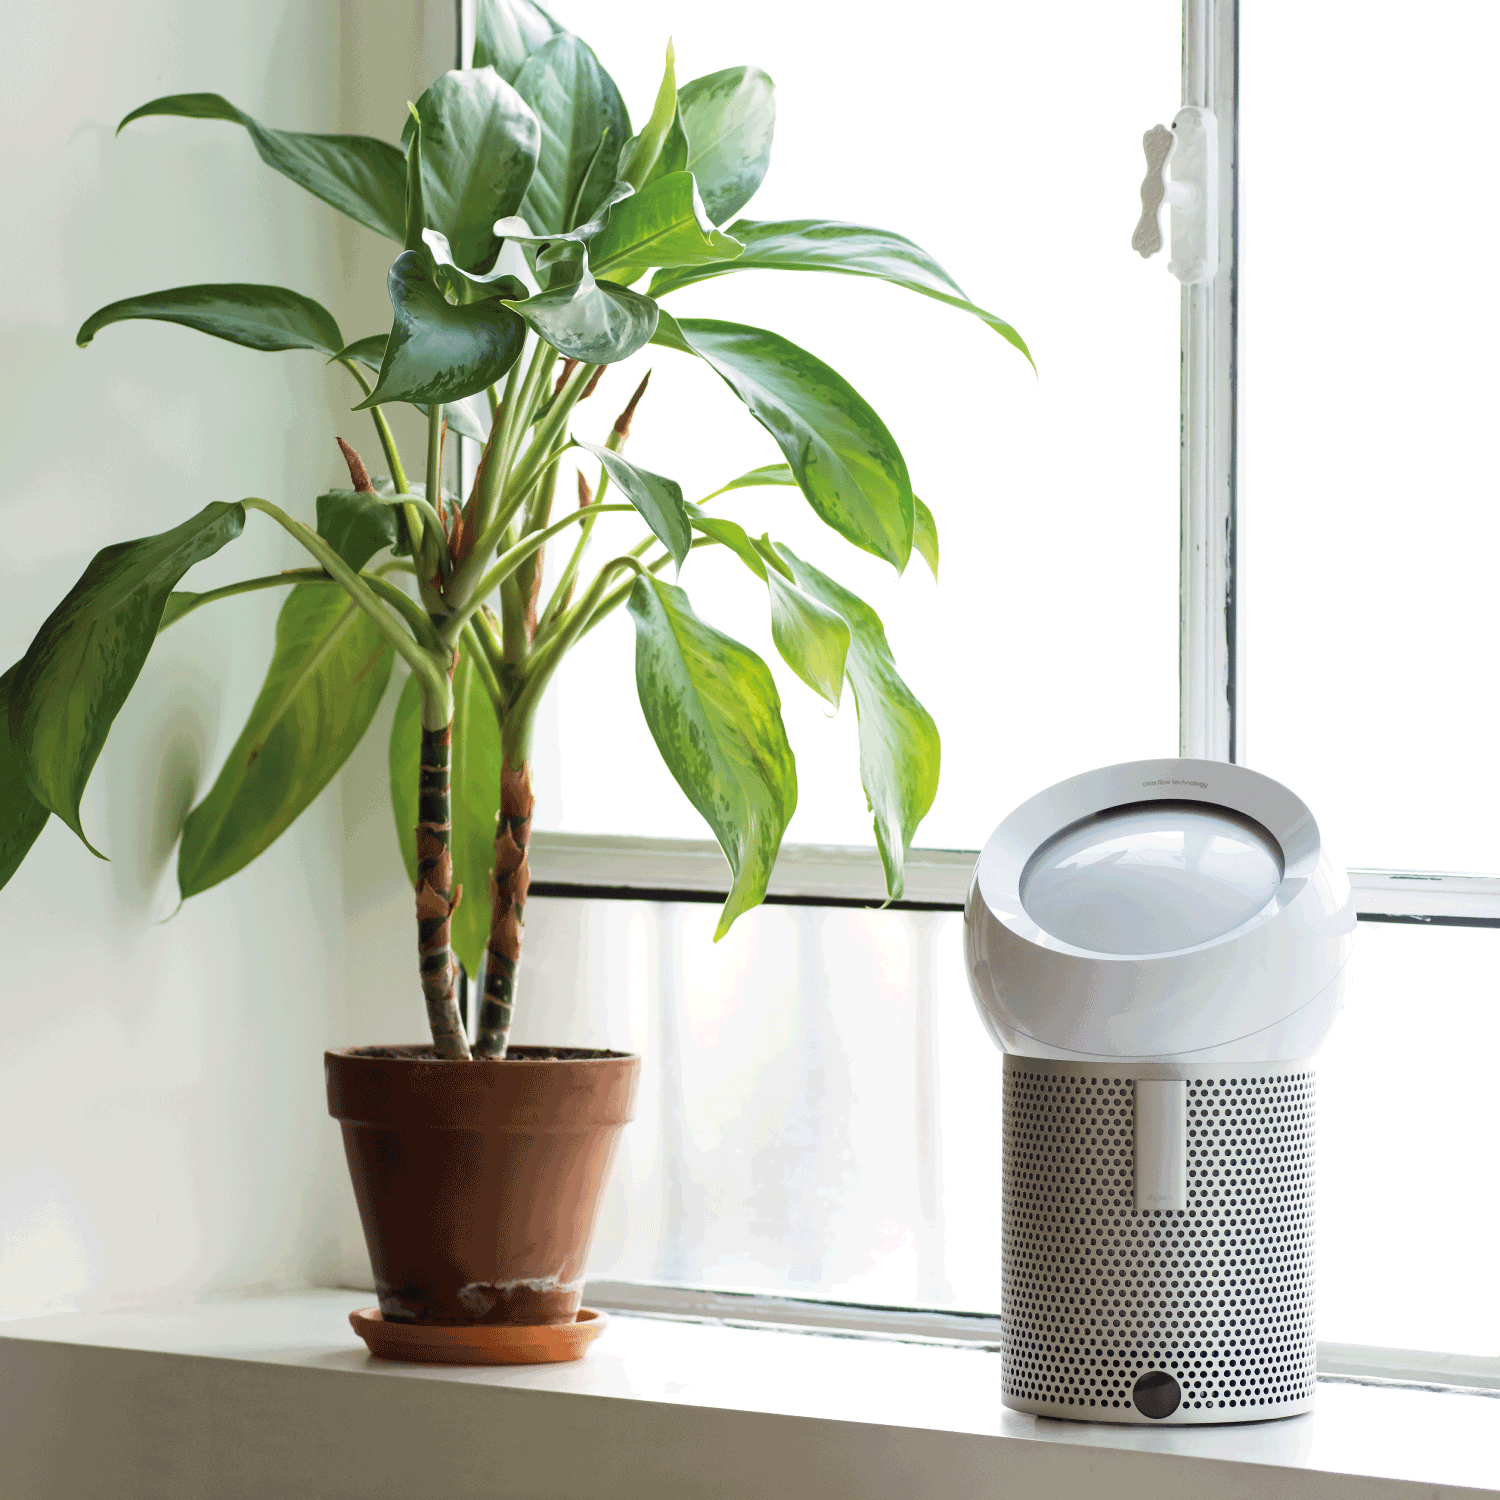 Large leafy green potted plant alongside a Dyson fan positioned in front of bright windows indoors in a house or office